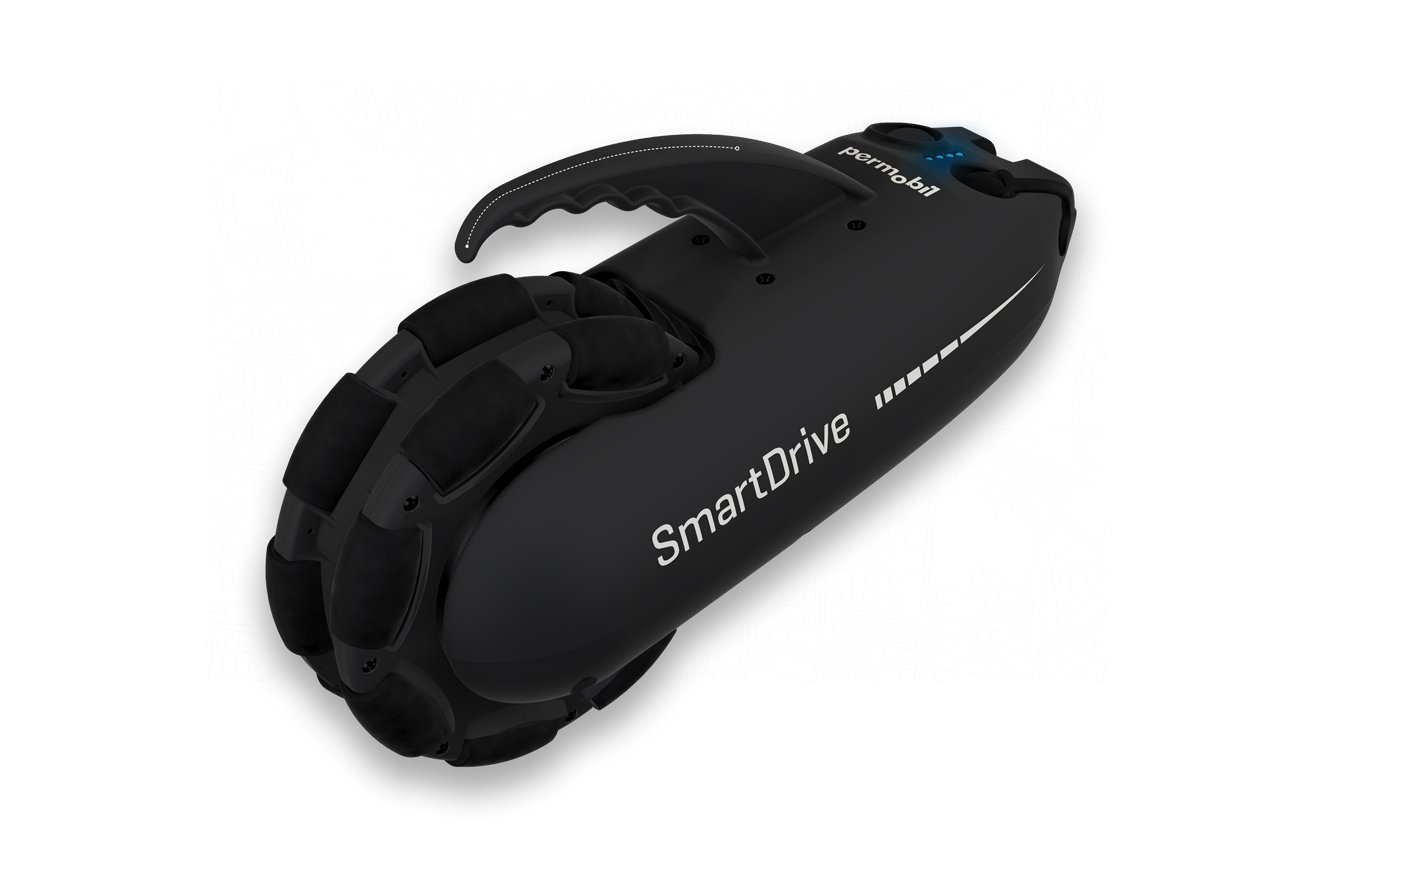 SmartDrive---Main-Product-Image-Wide